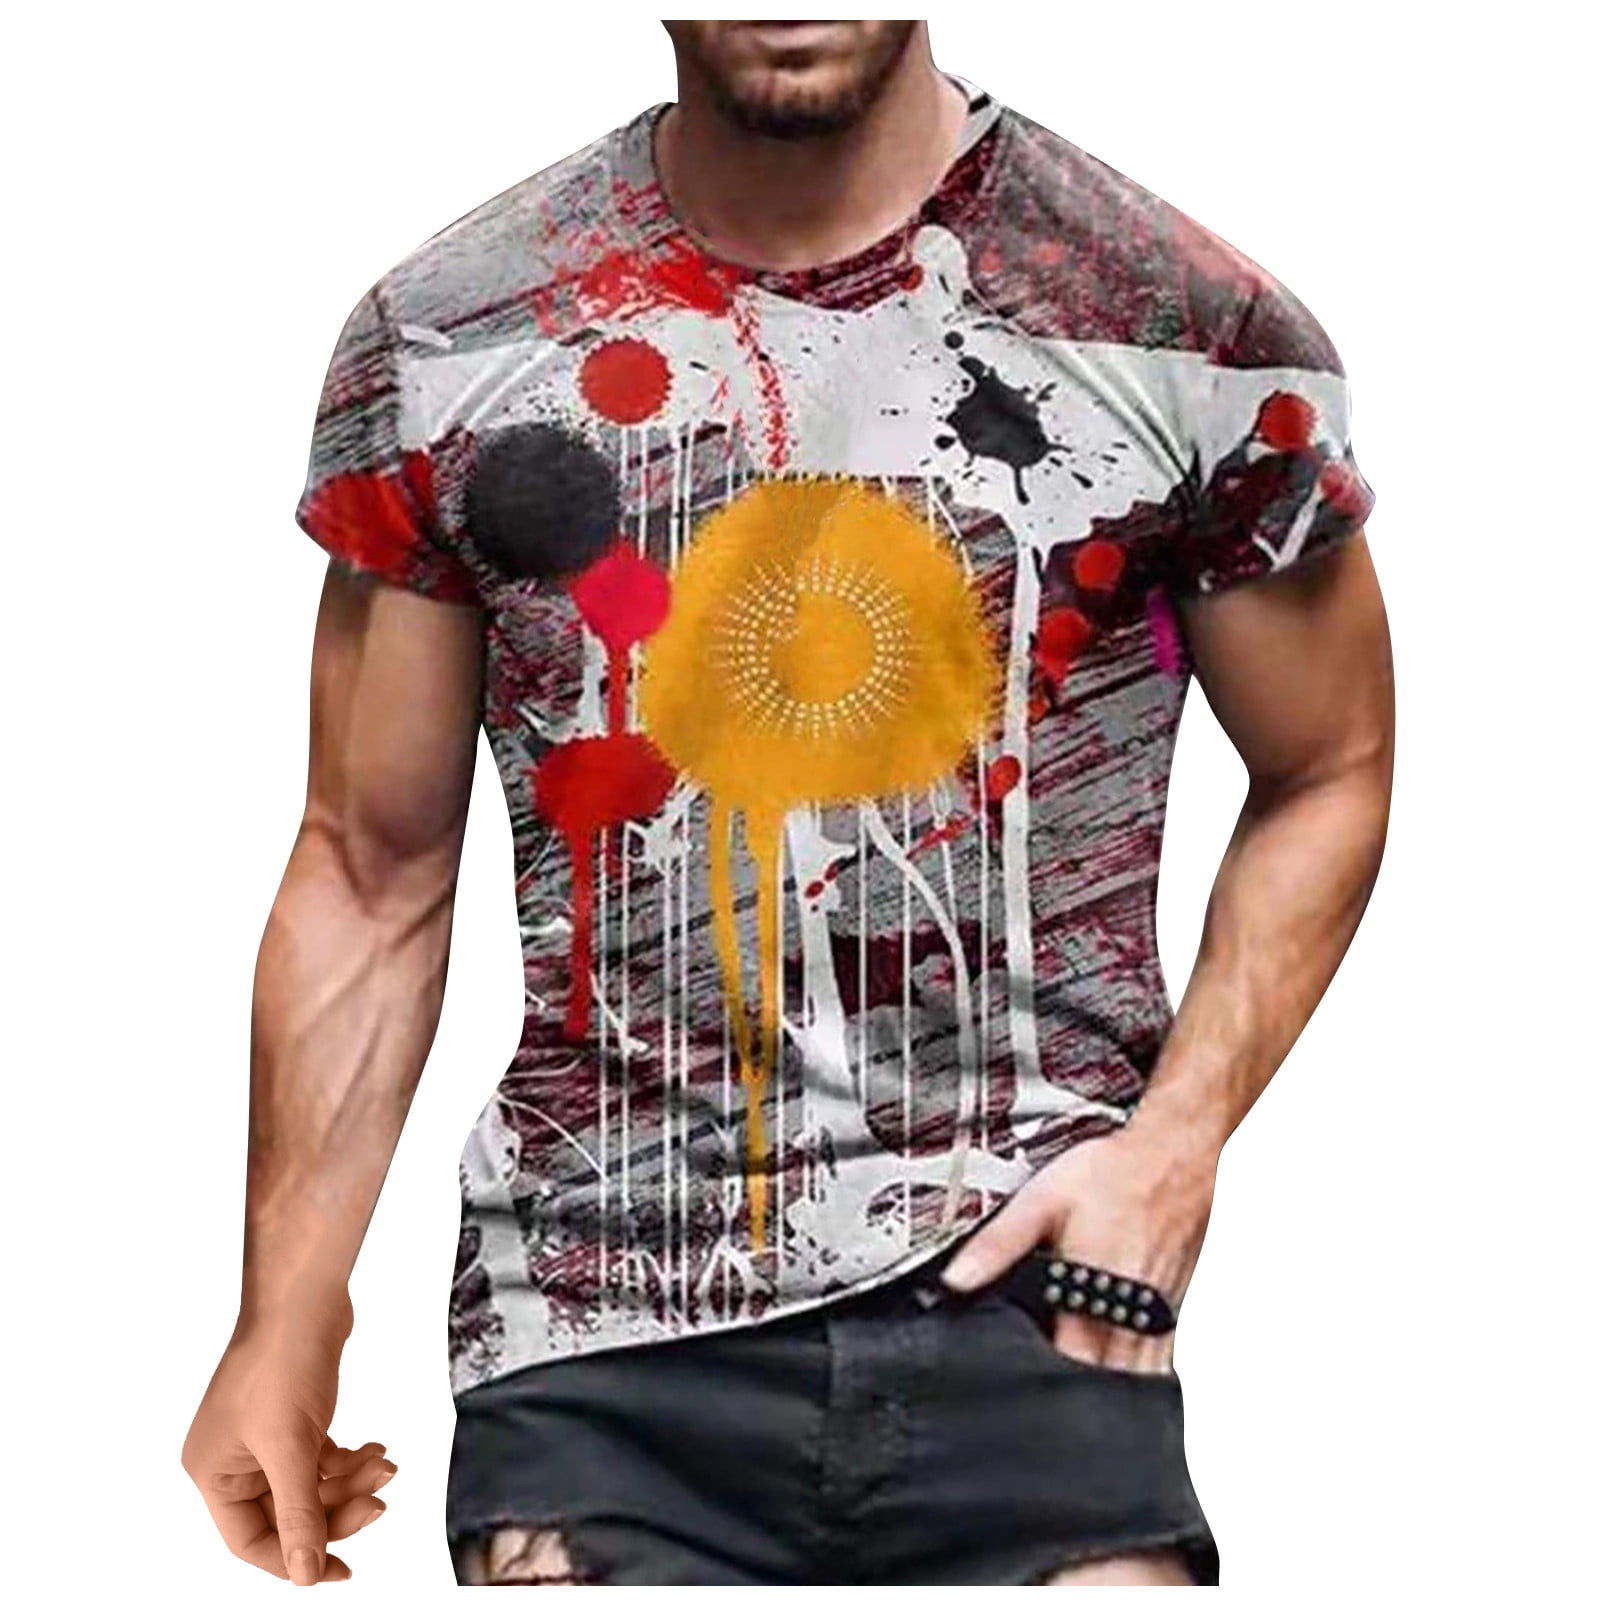 Crew Neck Slim-Fit 3D Print Quick Dry Summer T-Shirt Transser 4th of July for Mens Tee Shirts 